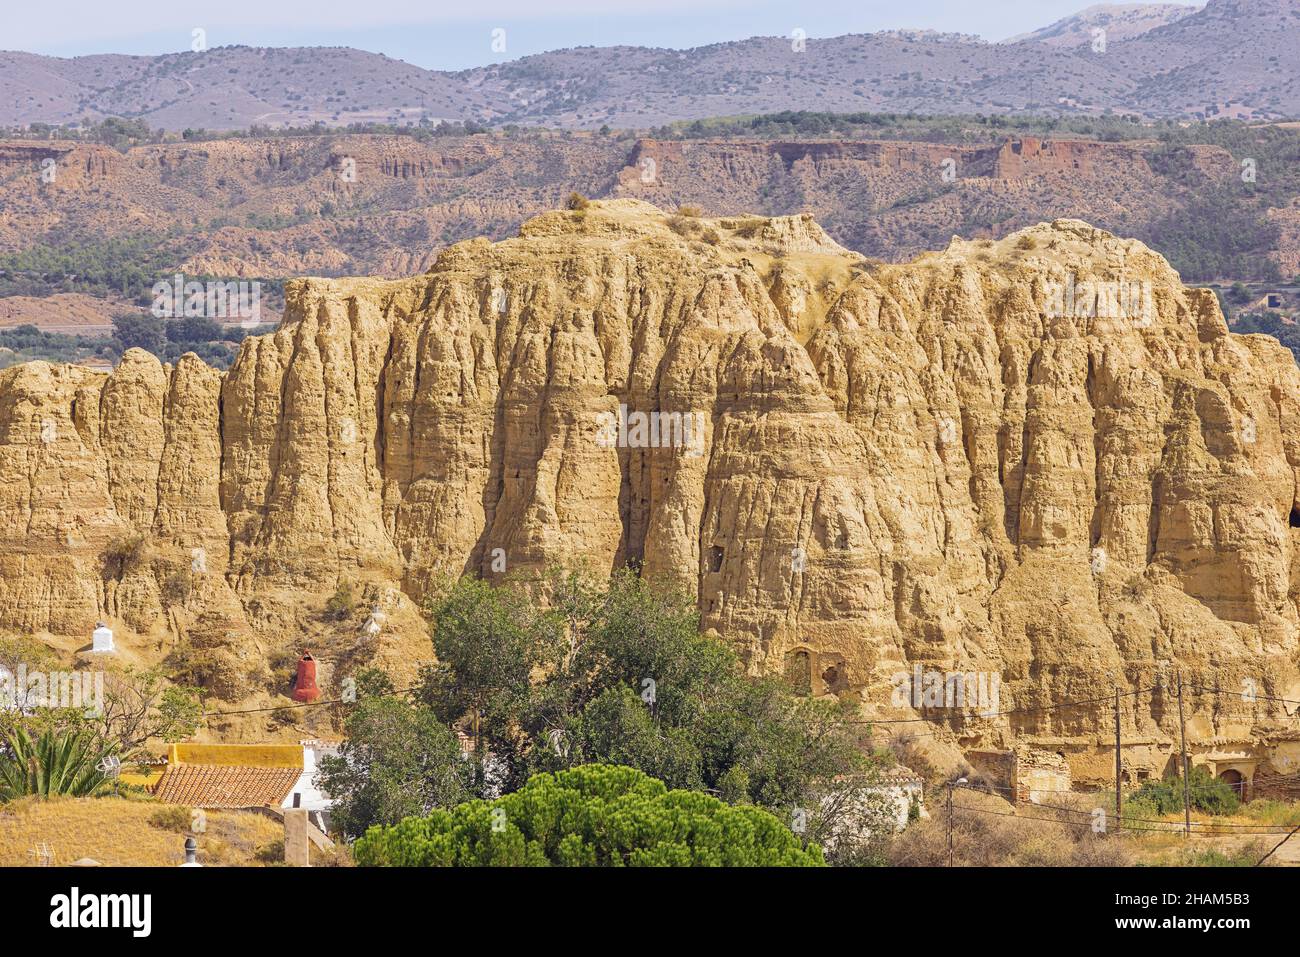 Tuff formations with troglodyte habitations to protect from the heat in Guadix. The heat causes a blurry view for the distant mountains. Stock Photo